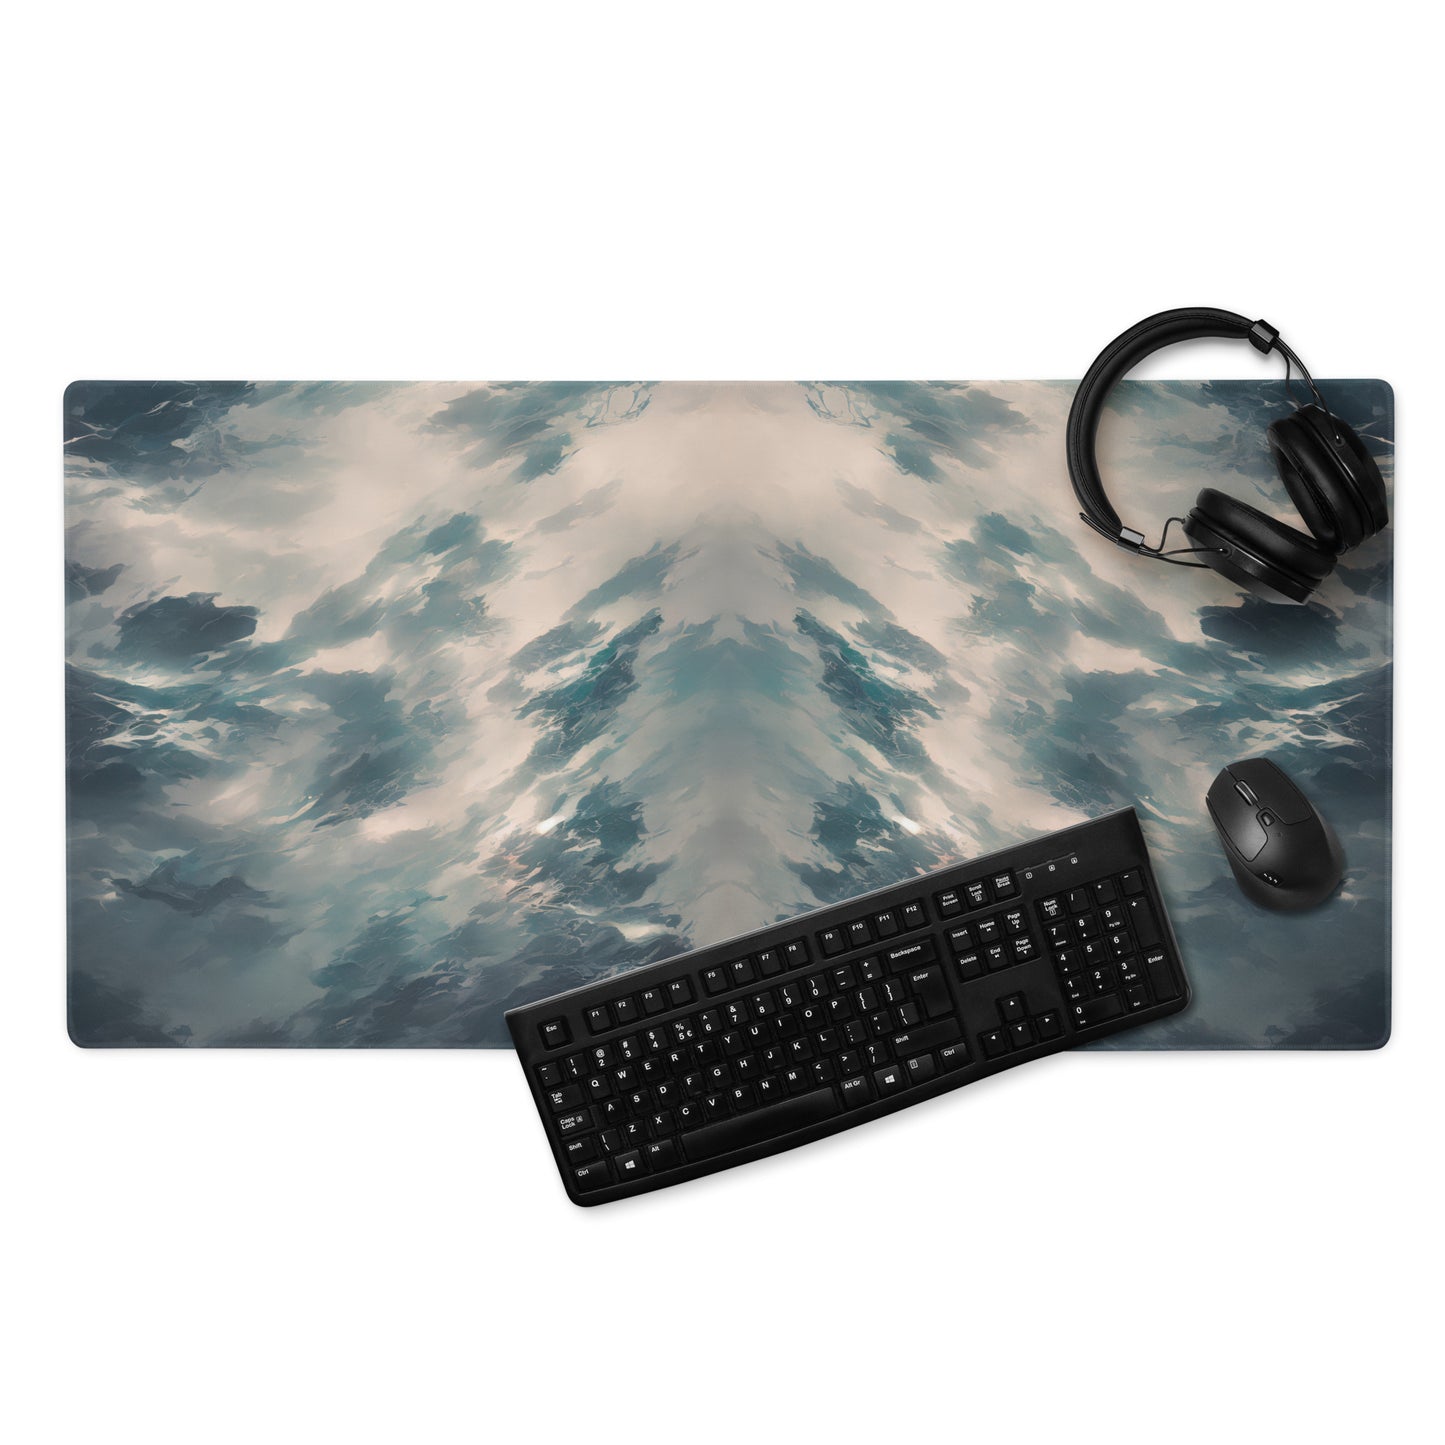 Smoky Mountains : Gaming mouse pad